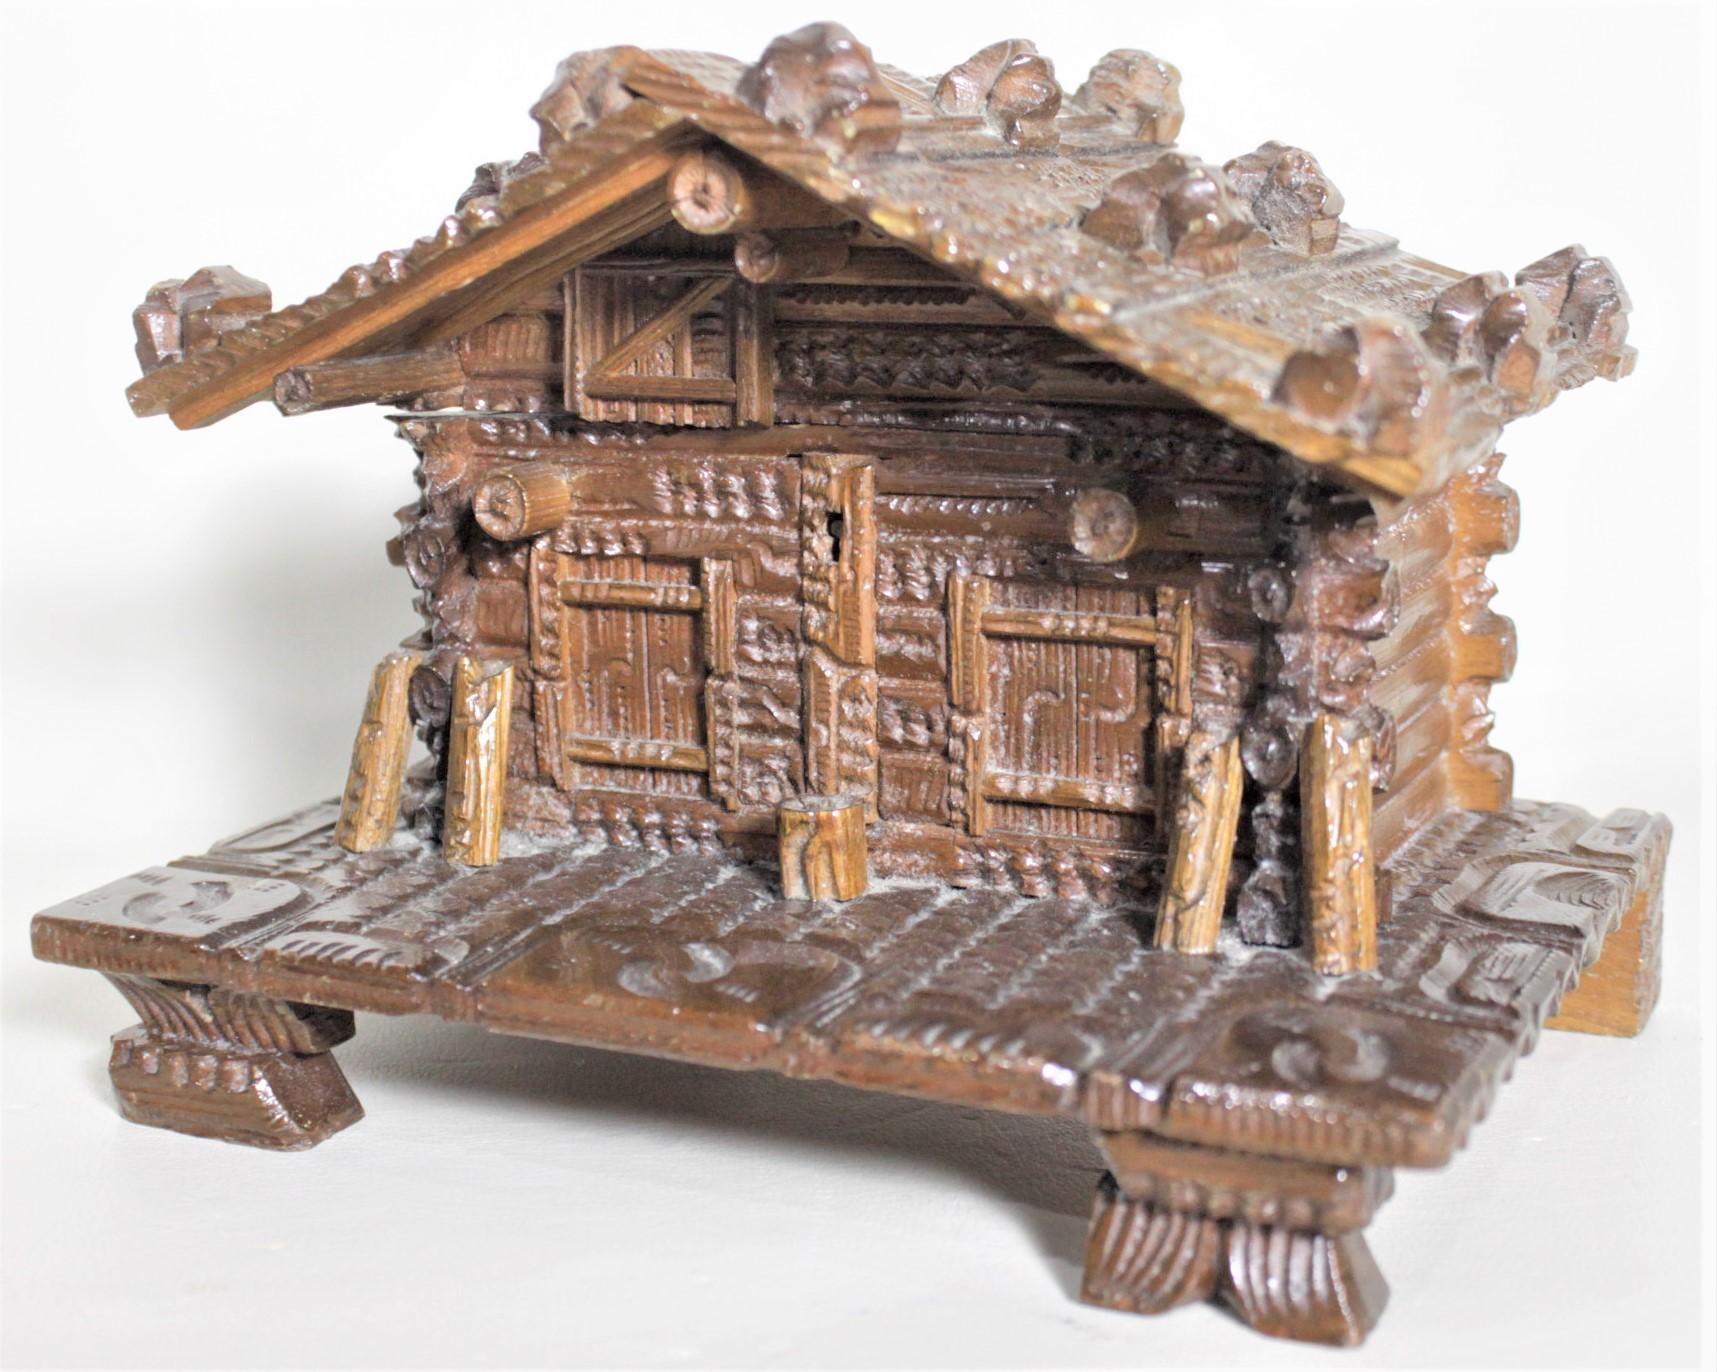 This antique hand carved Black Forest jewelry or trinket box is unsigned but presumed to have been made in either Germany or Switzerland in circa 1920 in the signature Black Forest style. The box an ornately carved log cabin done with great detail,